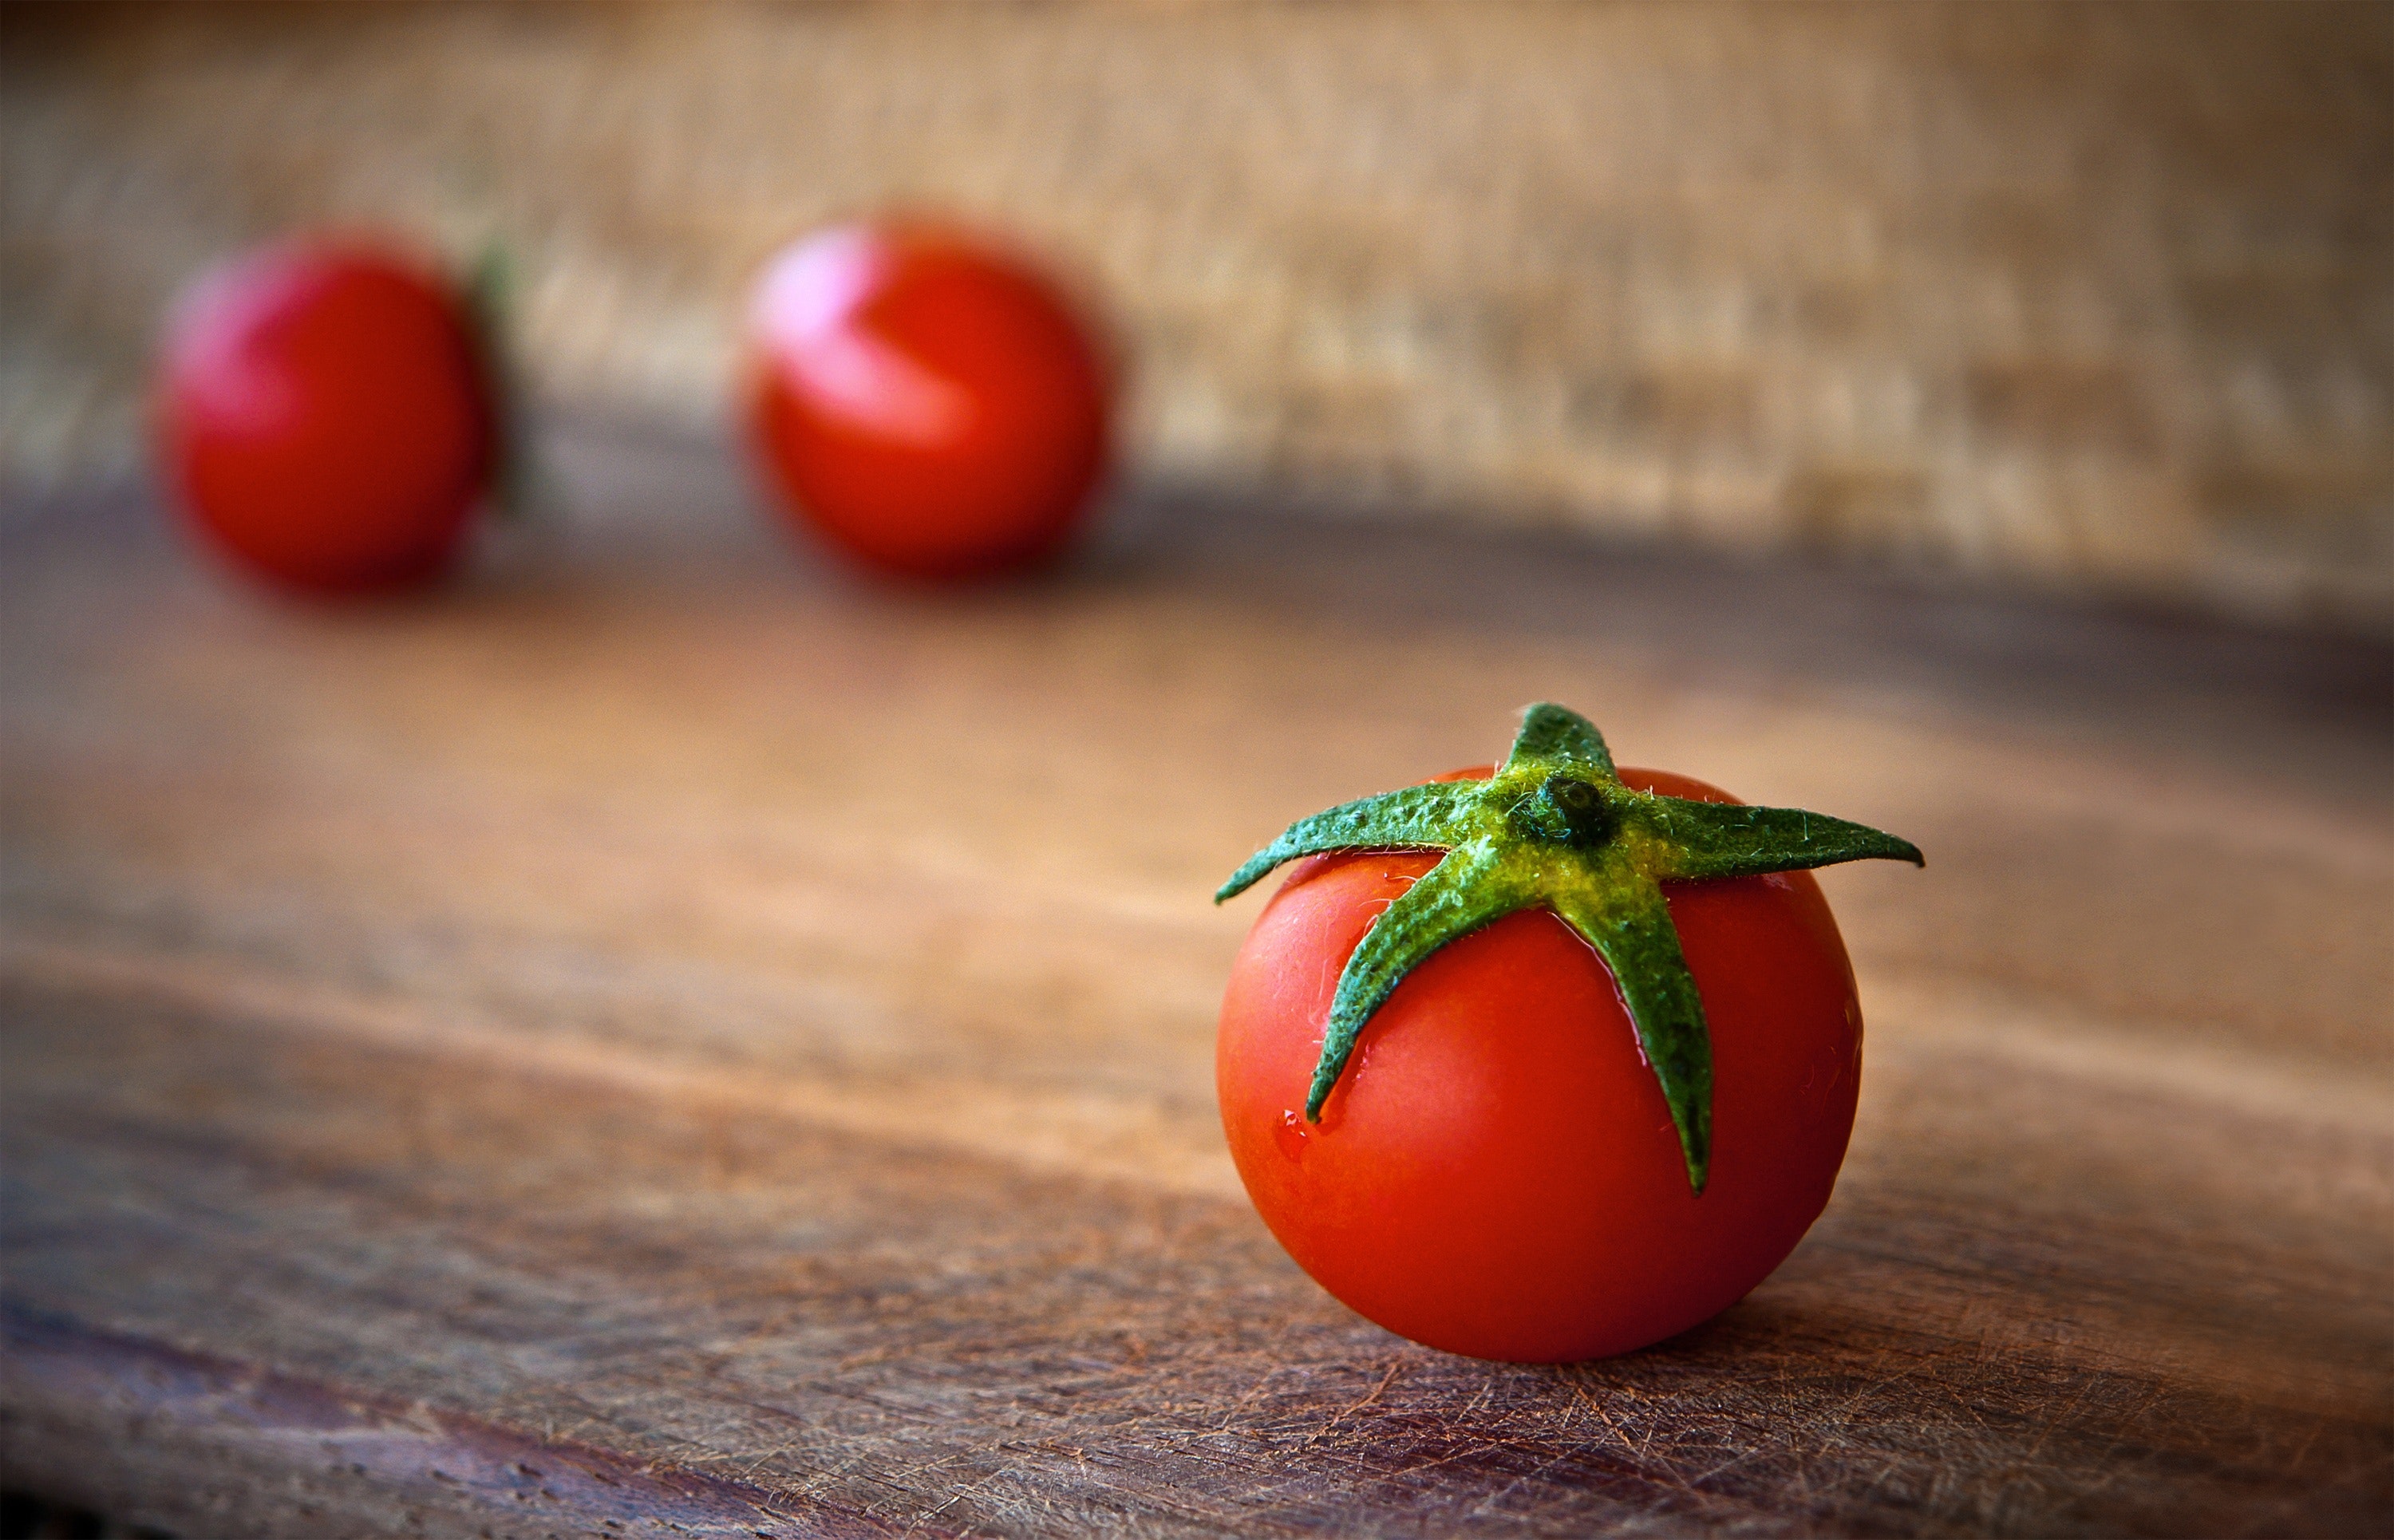 Close-up of Tomatoes on Wooden Table, Agriculture, Kitchen, Vegetable, Tomato, HQ Photo